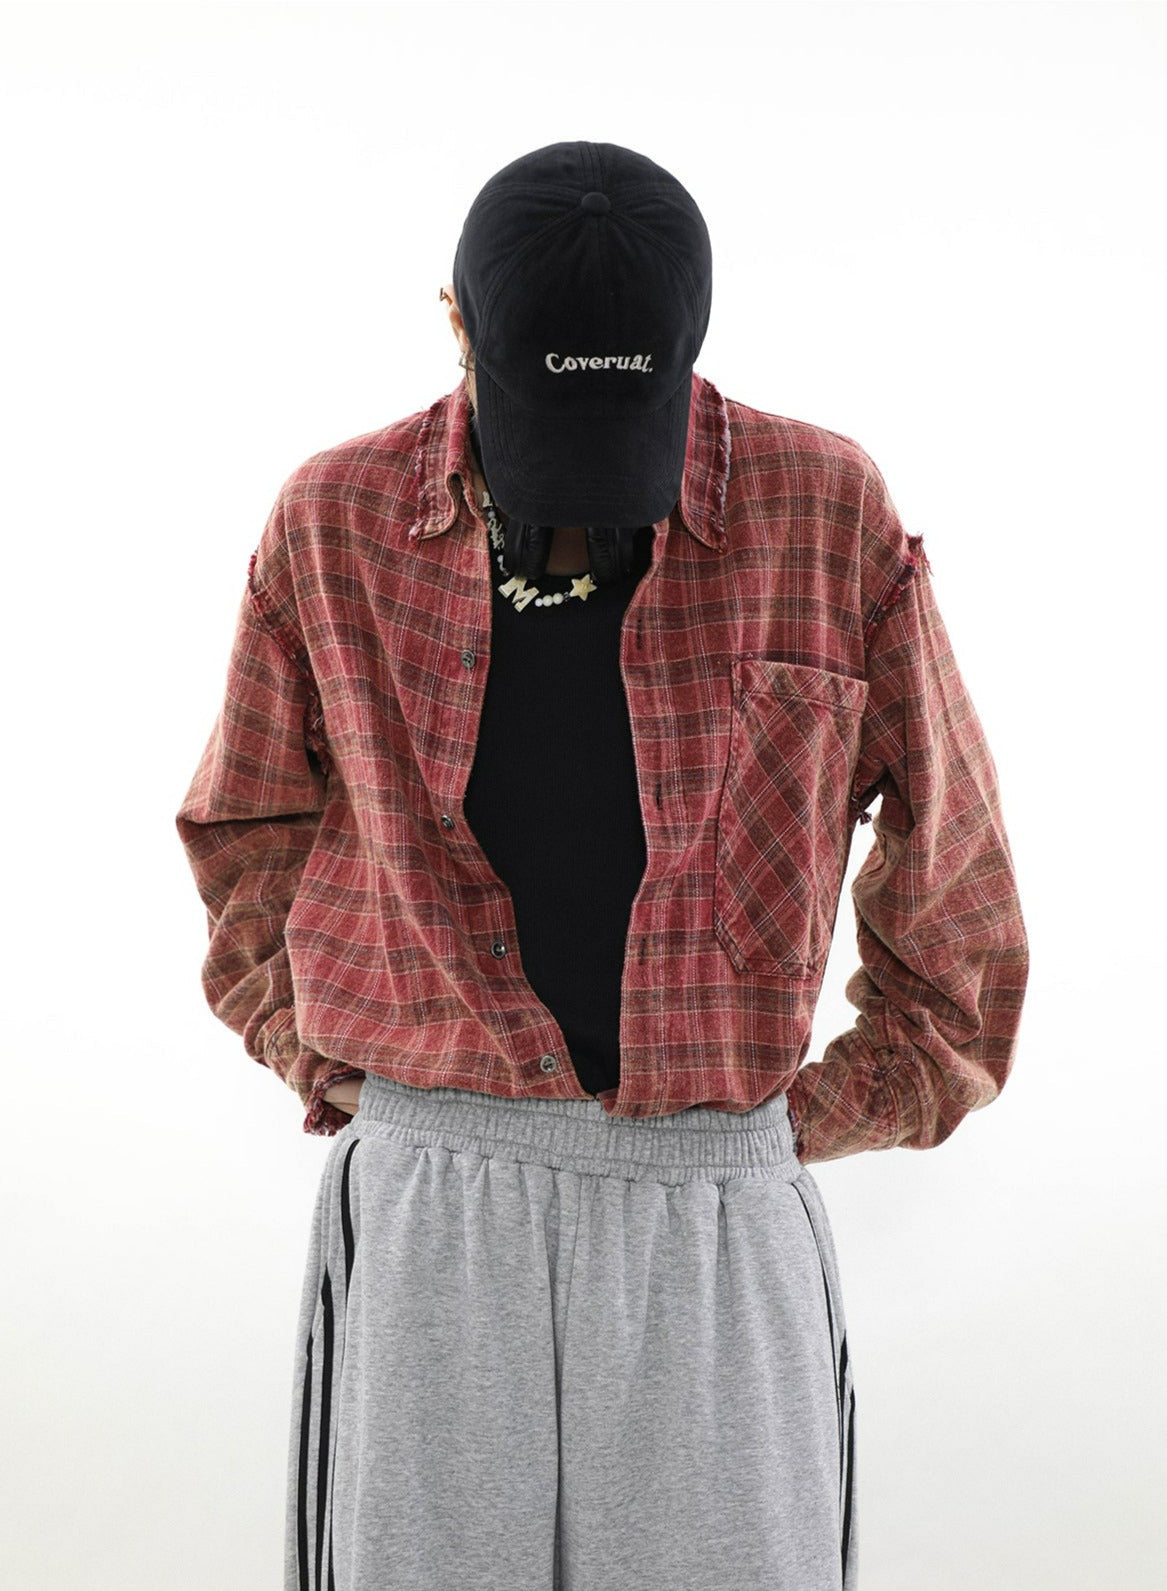 Vintage Distressed Style Plaid Shirt Korean Street Fashion Shirt By Mr Nearly Shop Online at OH Vault